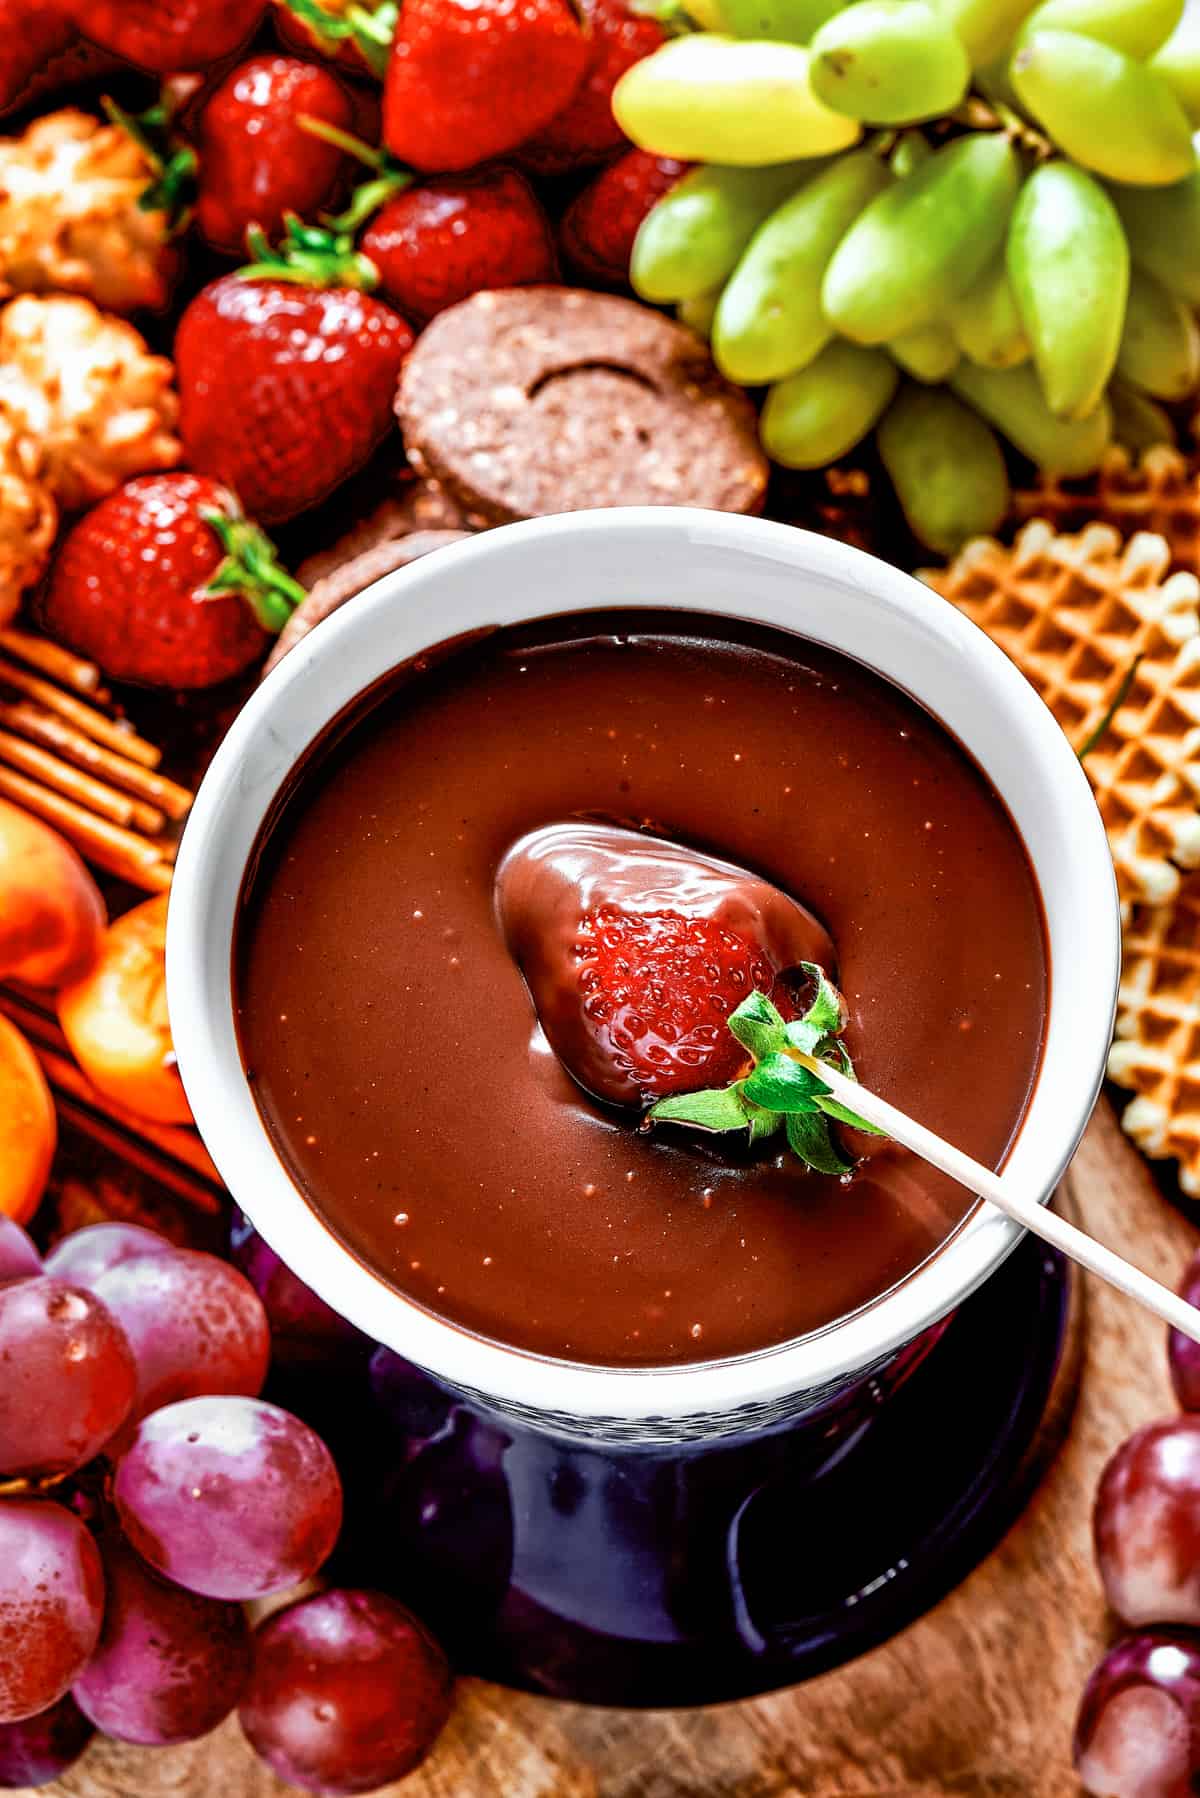 Dipping a strawberry in chocolate fondue.